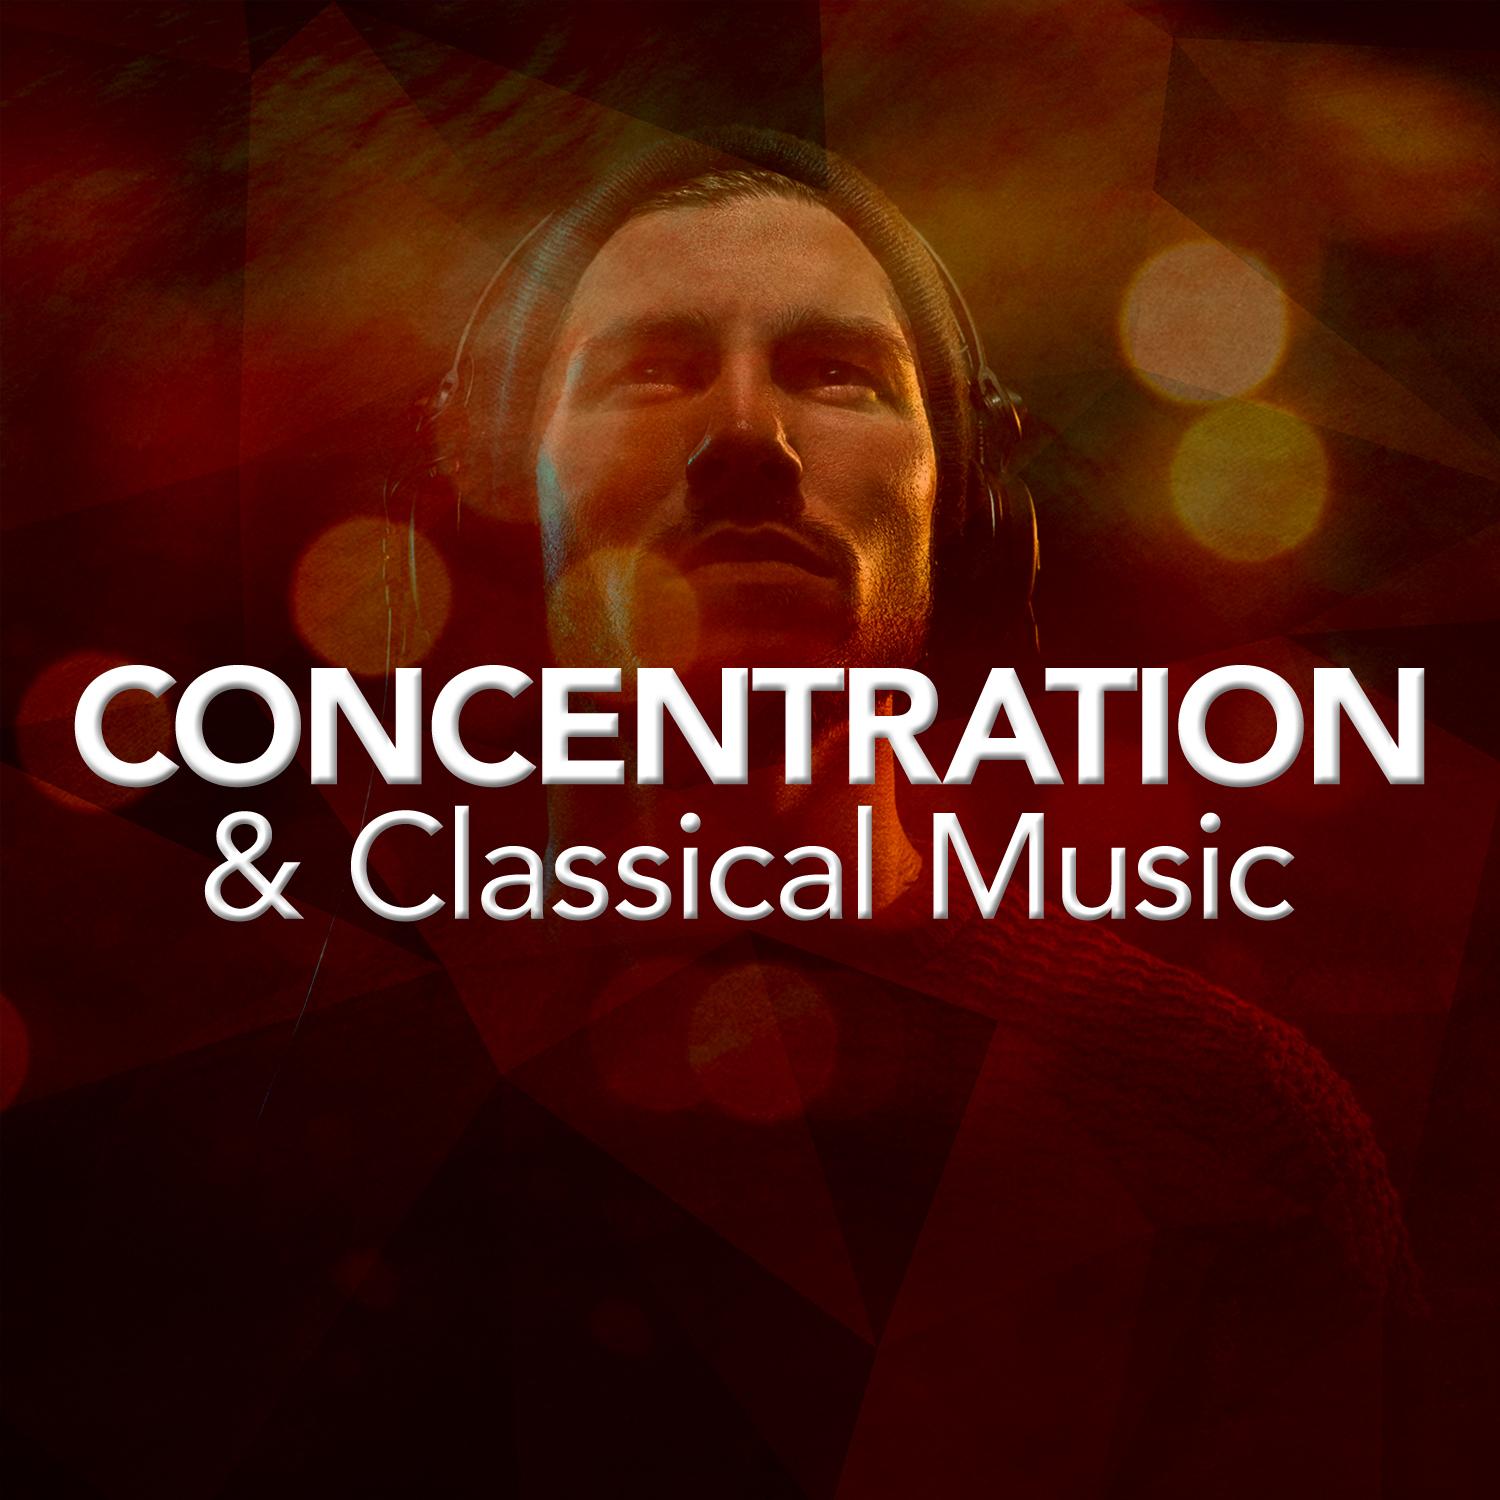 Concentration & Classical Music